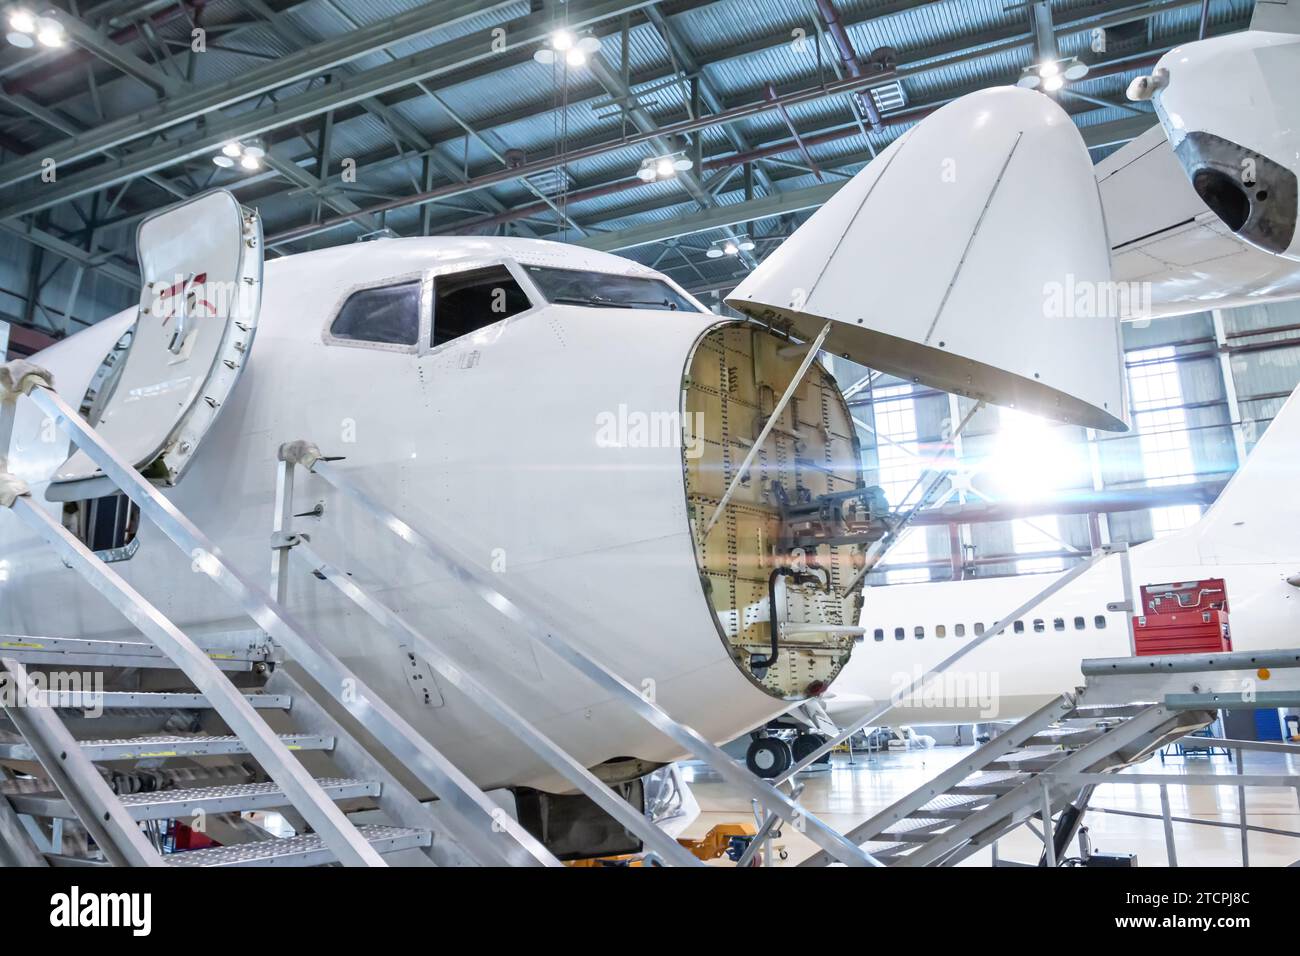 Front view of the white passenger airlines under maintenance in the aviation hangar. The jetliner has opened weather radar. Checking mechanical system Stock Photo